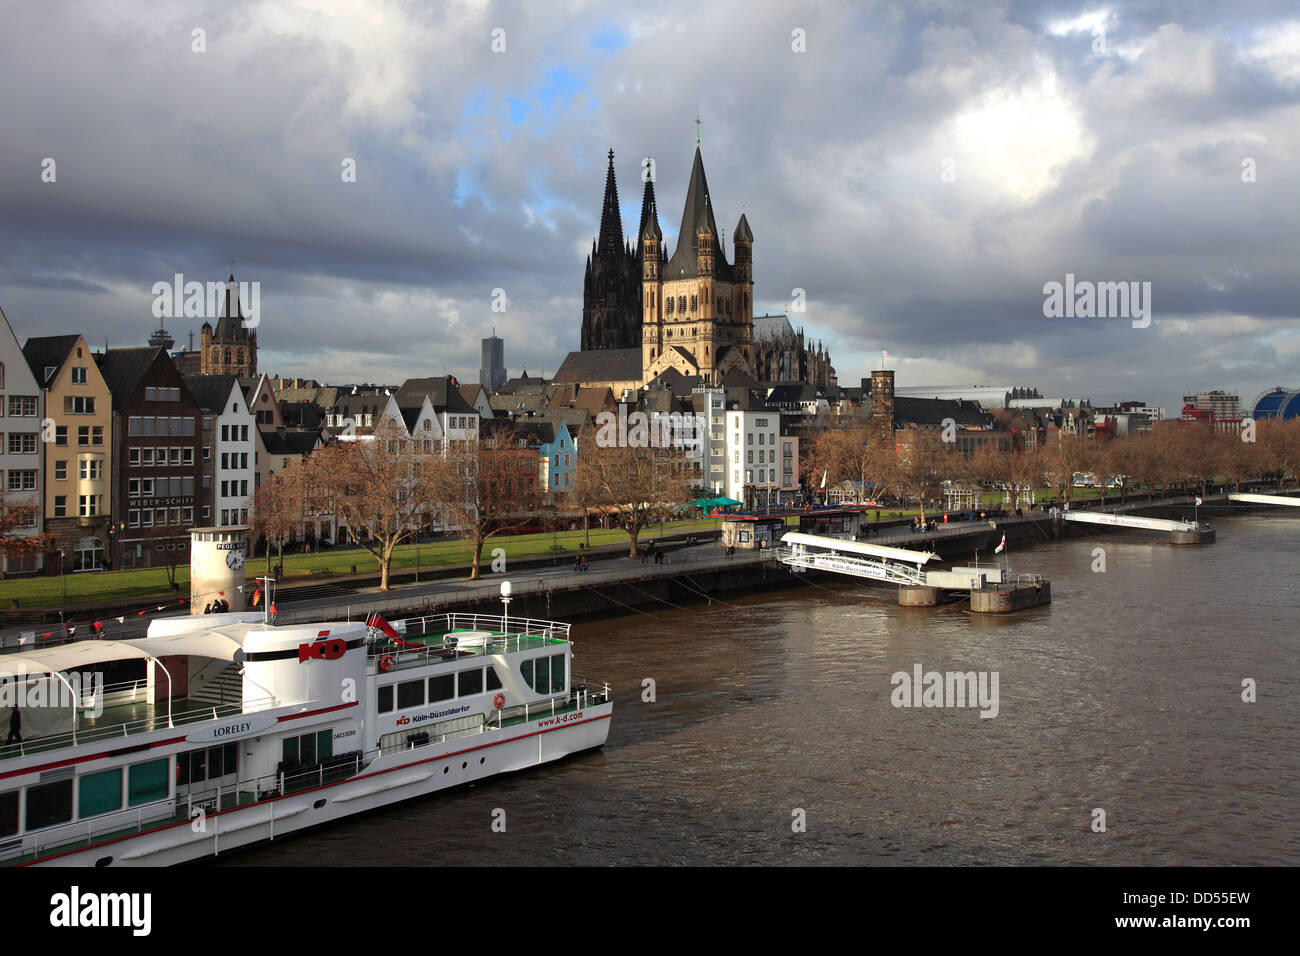 Ornate buildings in the Fischmarket area of Cologne City, North Rhine-Westphalia, Germany, Europe Stock Photo